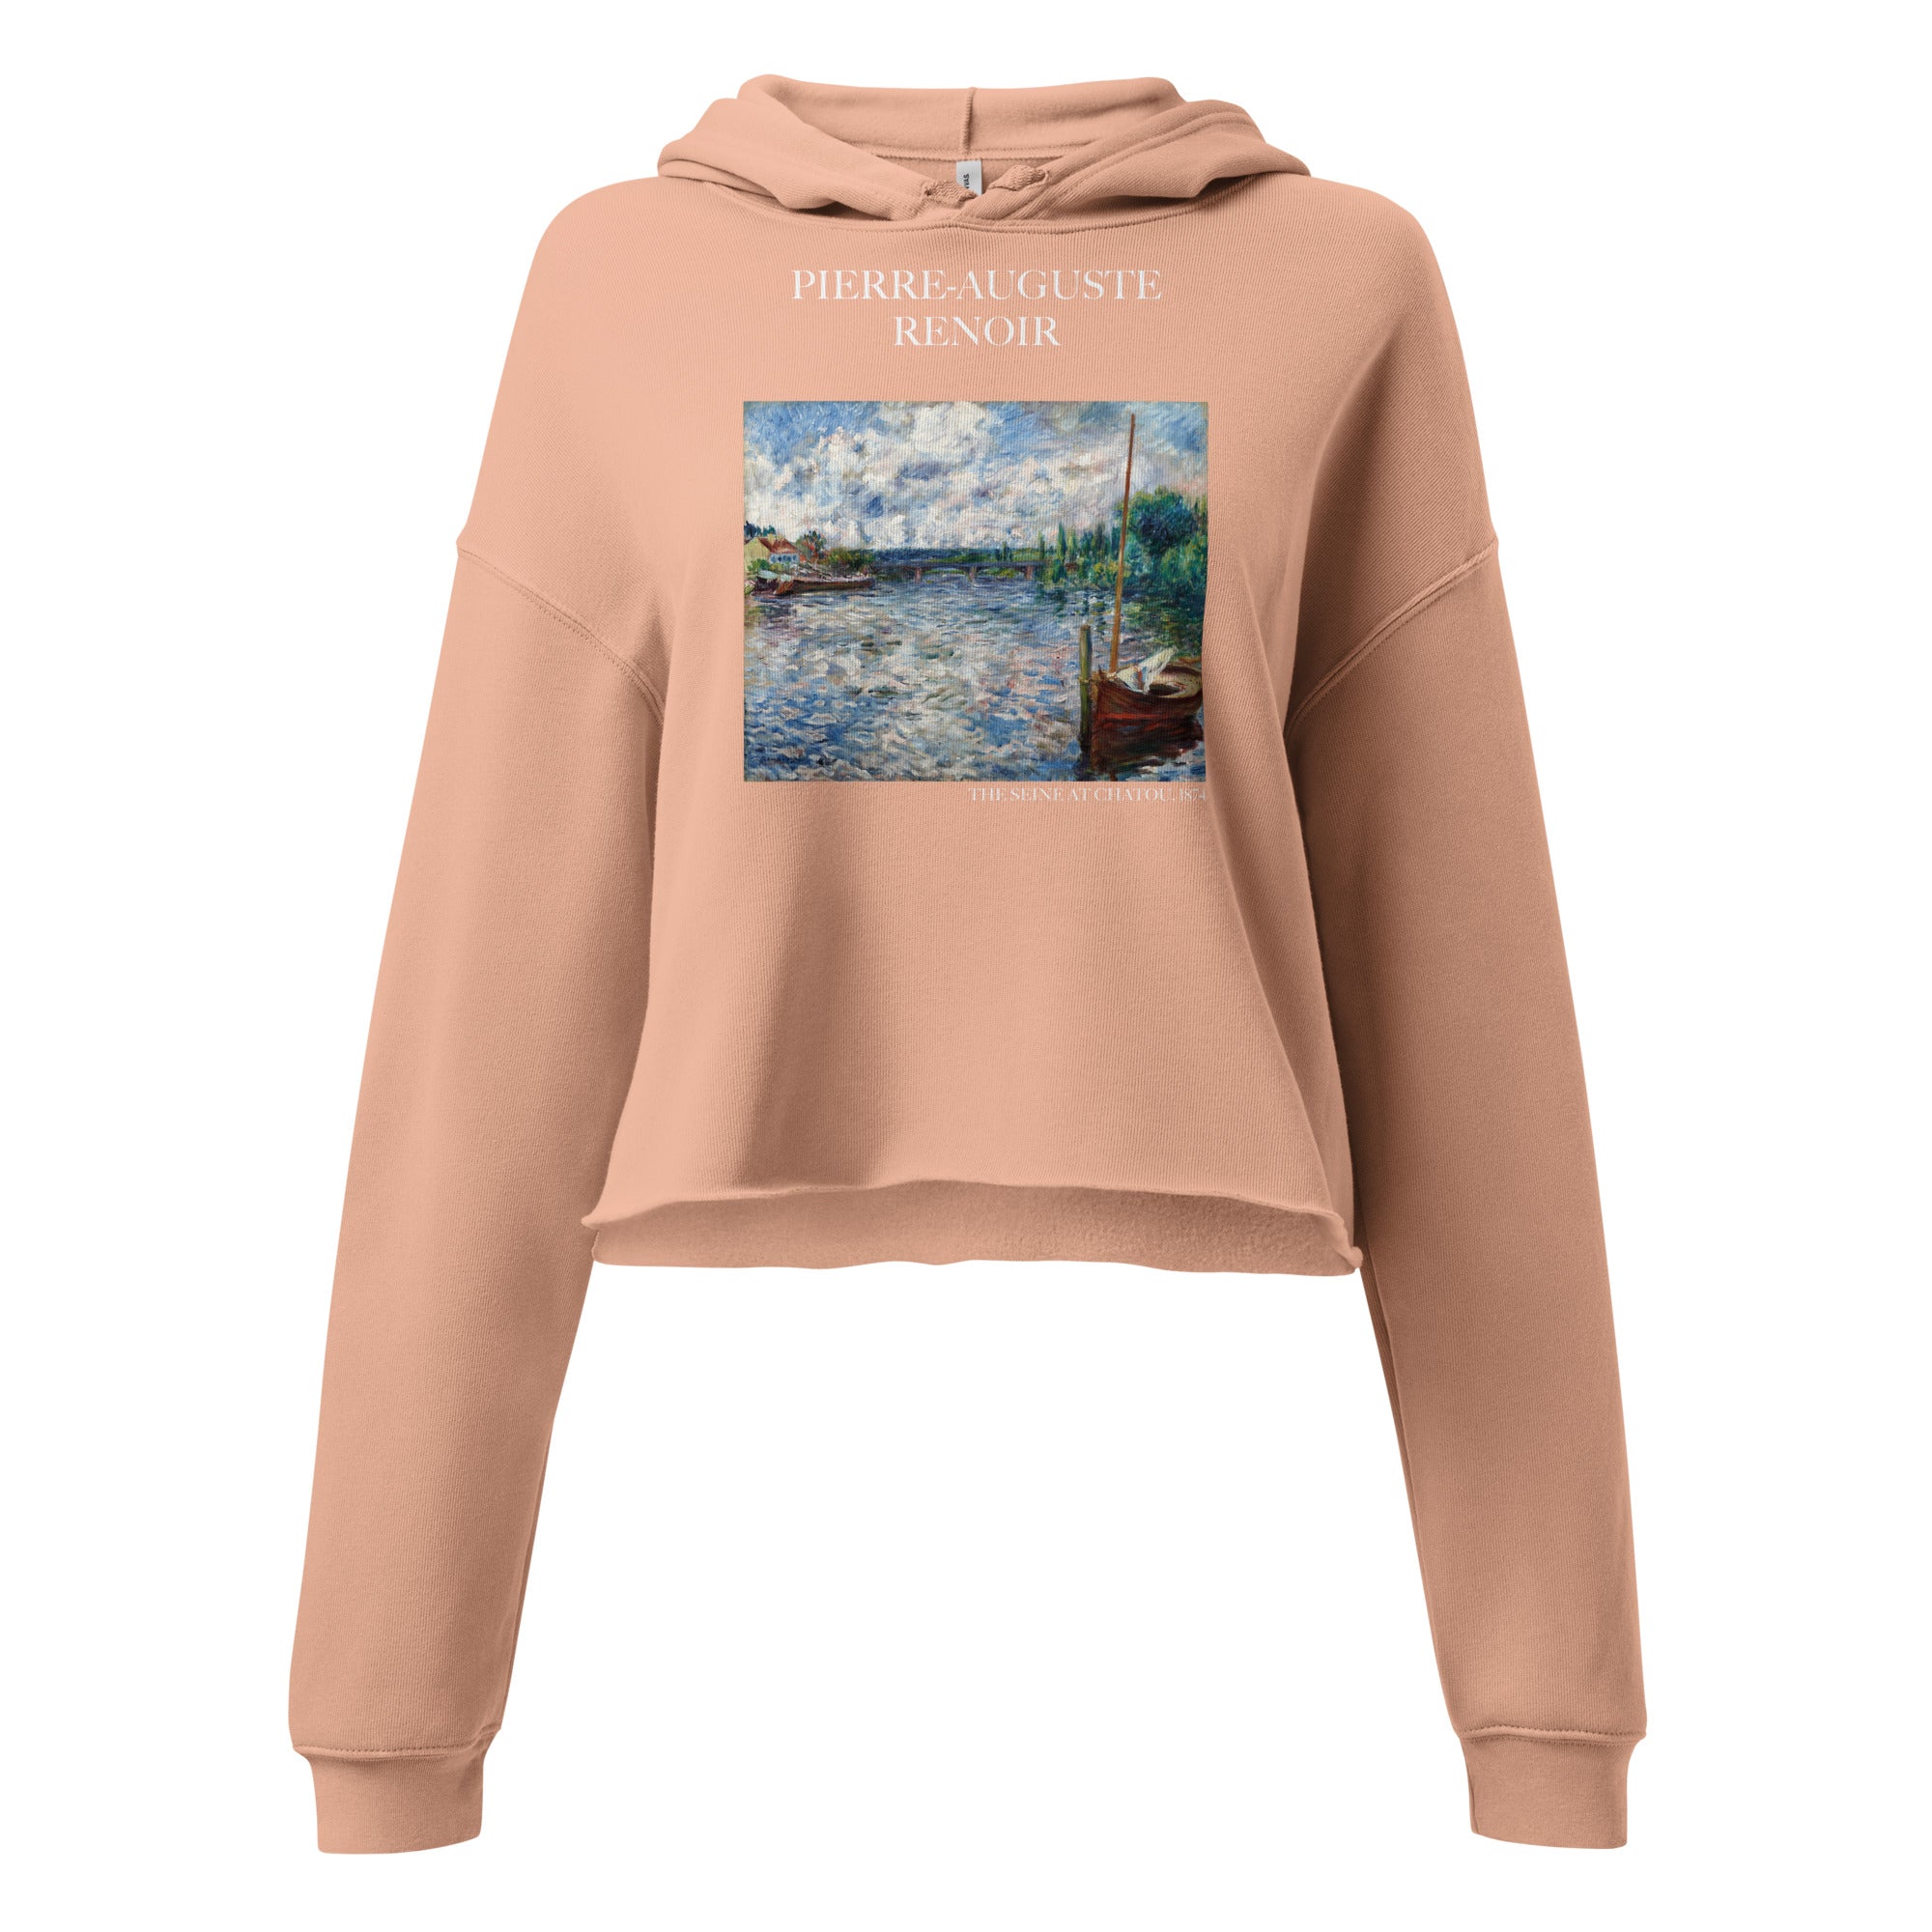 Pierre-Auguste Renoir 'The Seine at Chatou' Famous Painting Cropped Hoodie | Premium Art Cropped Hoodie